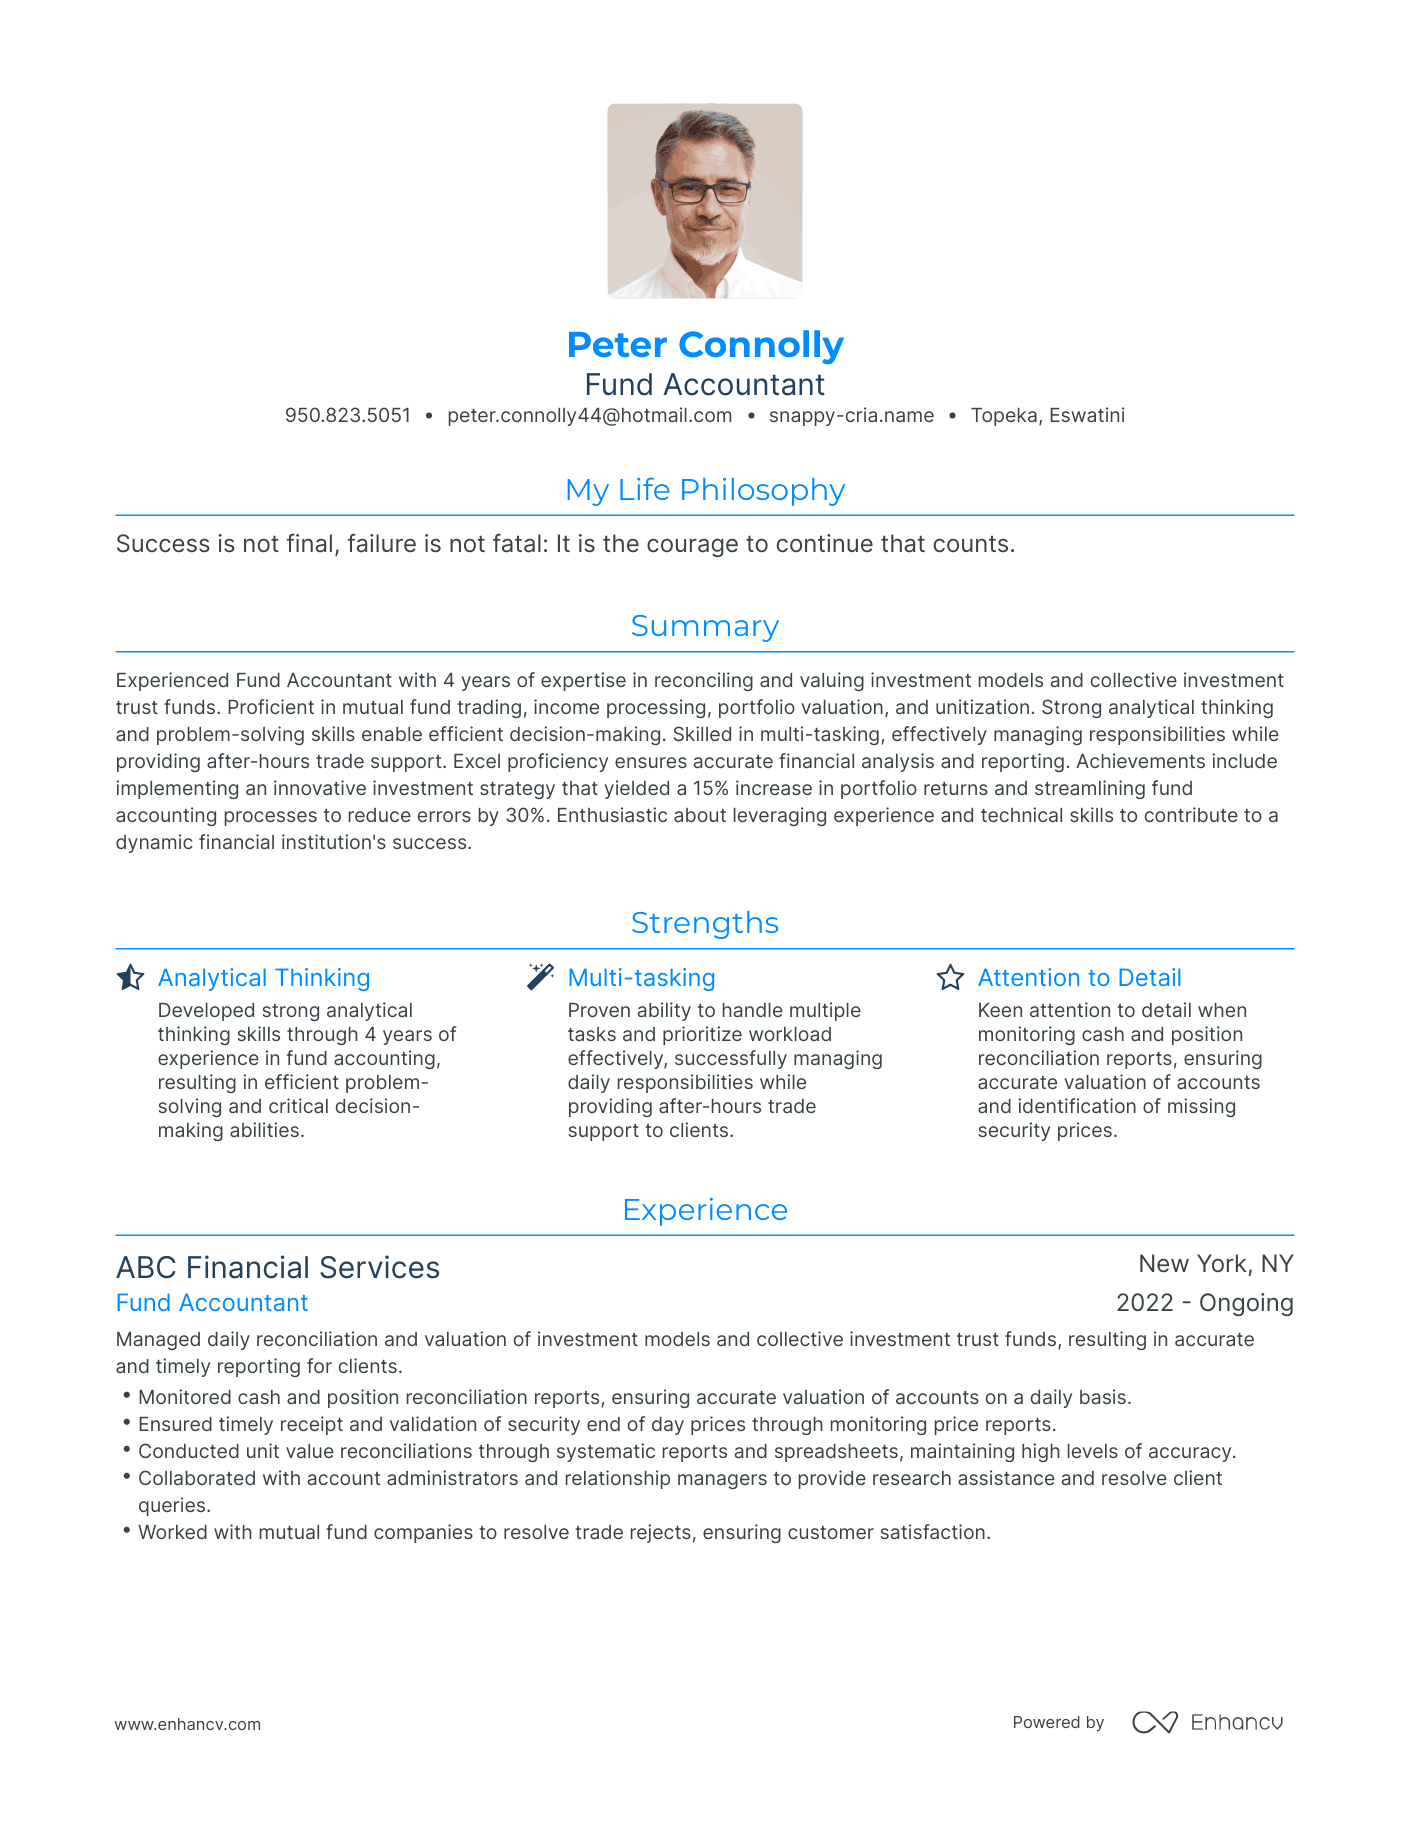 Modern Fund Accountant Resume Example